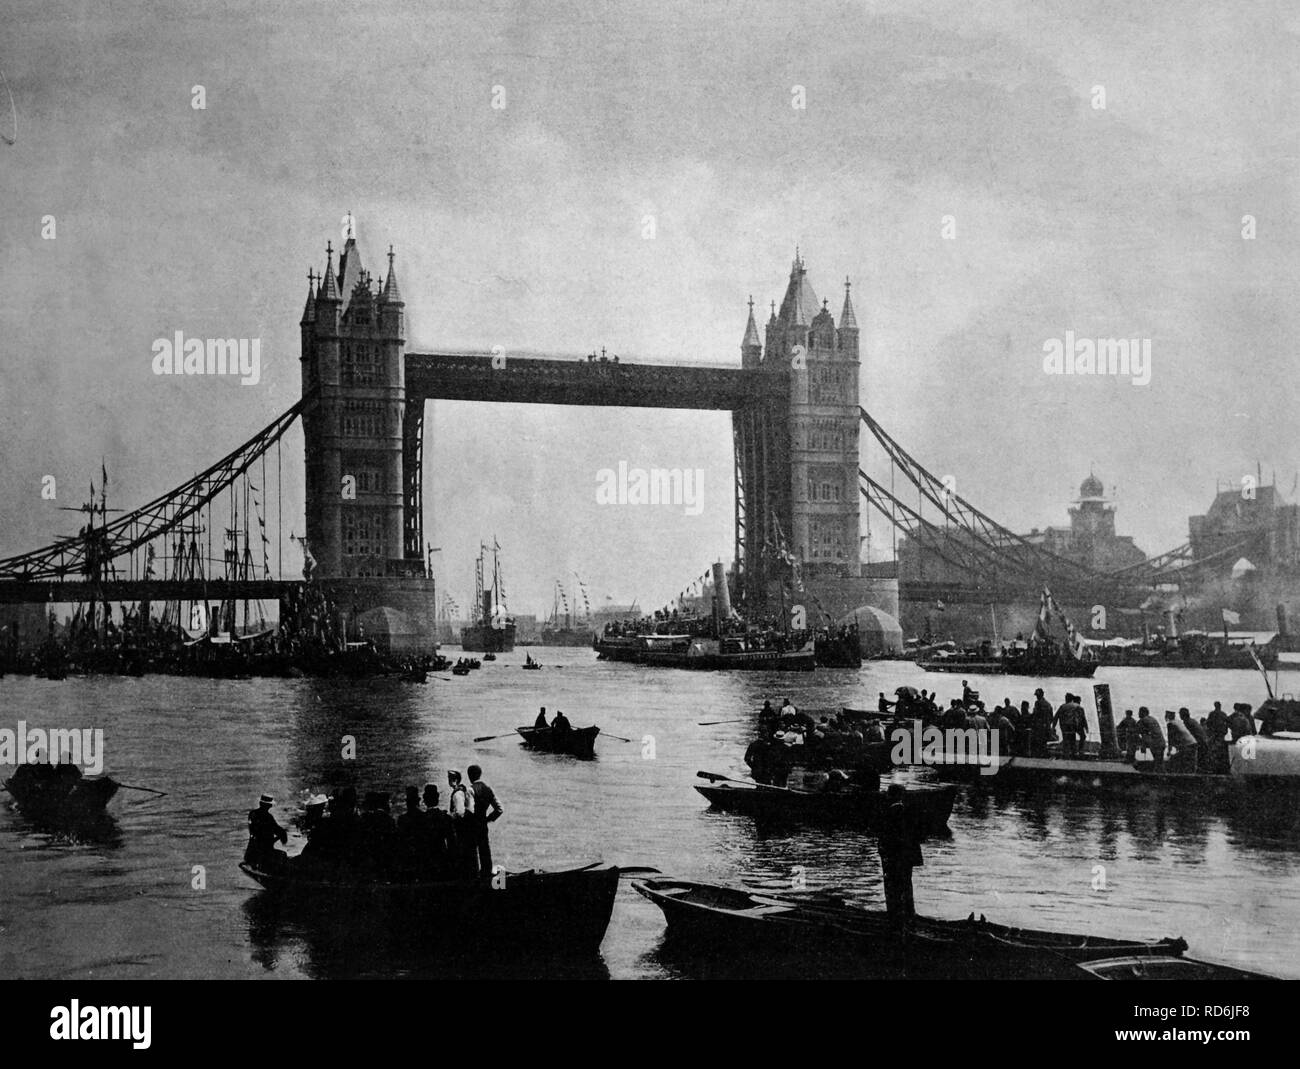 London scapes Black and White Stock Photos & Images - Alamy